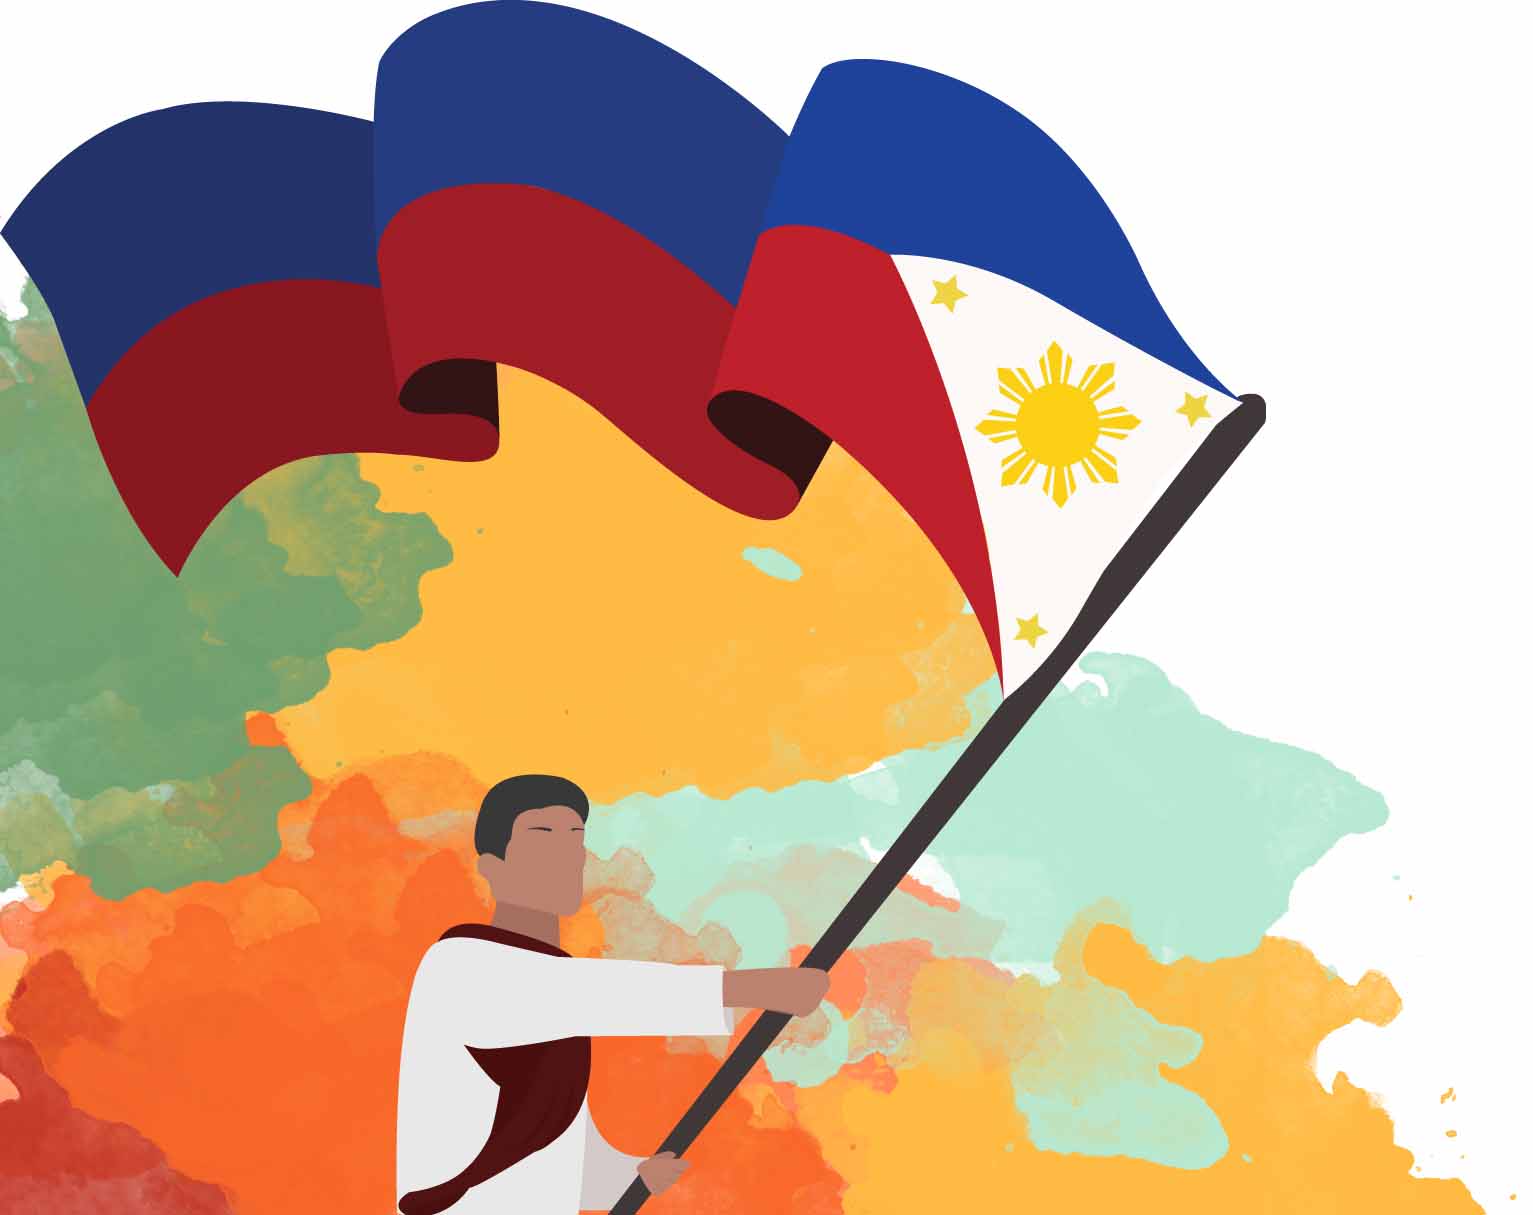 Philippines Independence Day